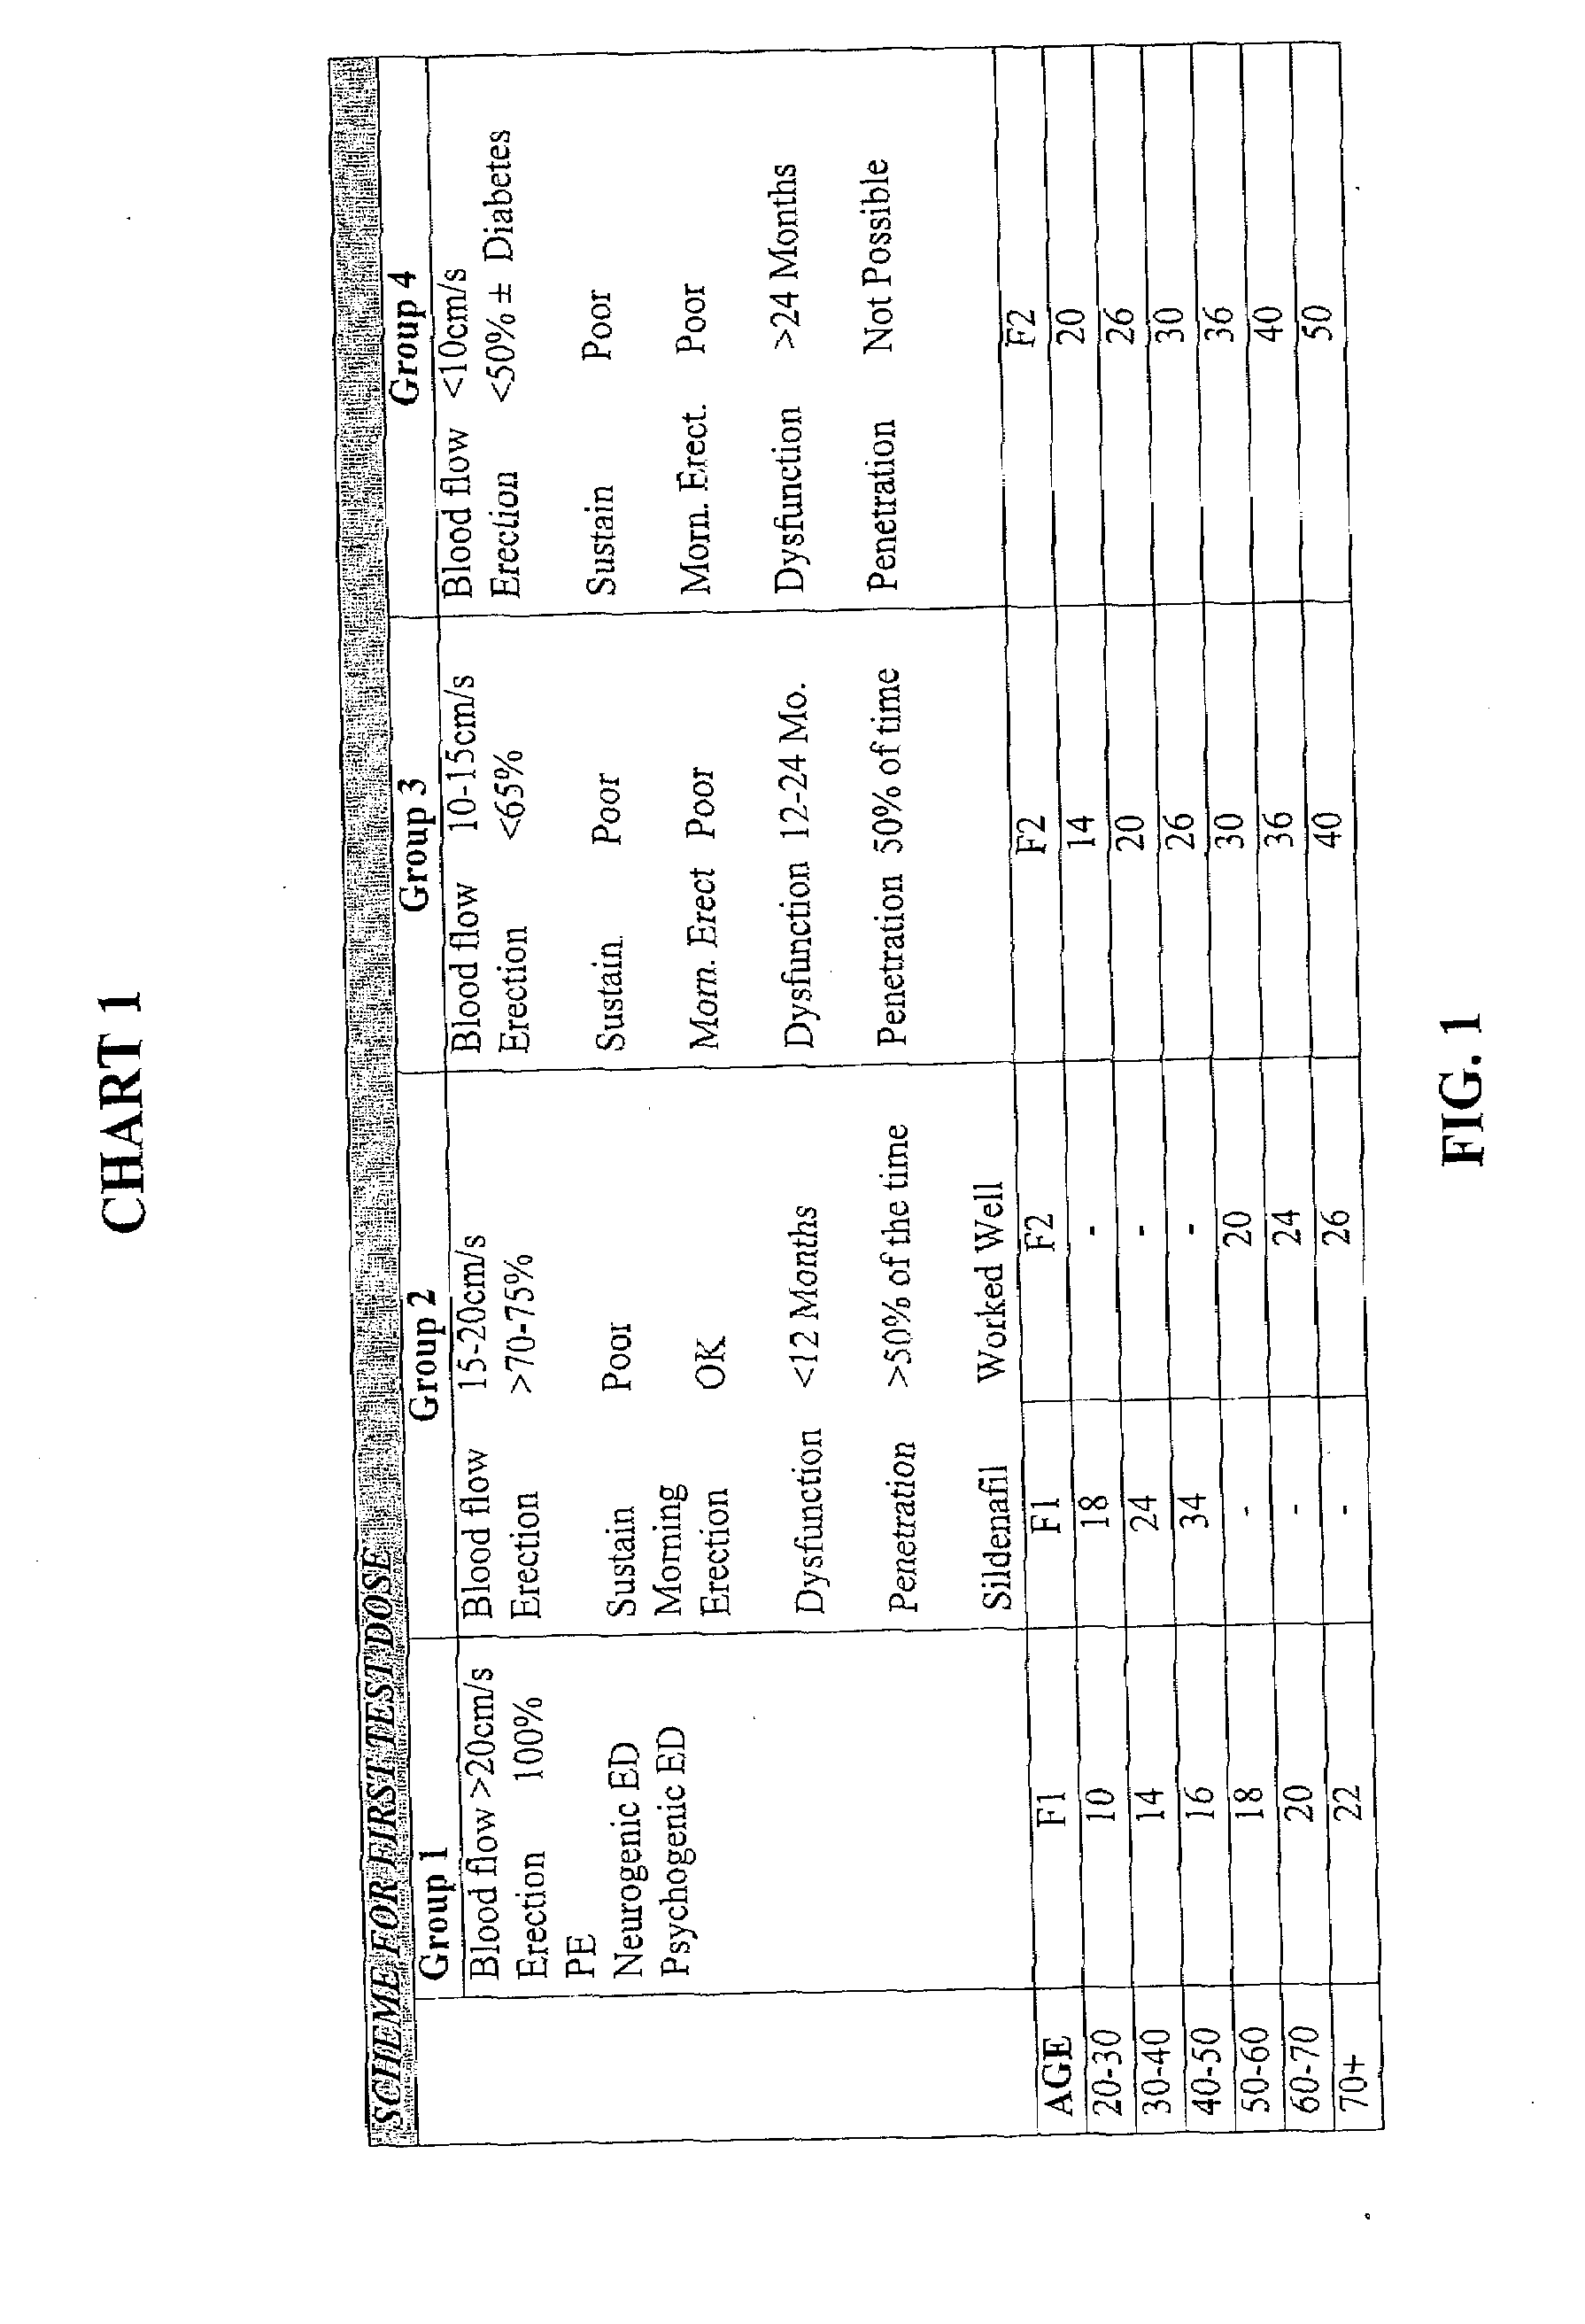 Methods and Compositions for Treatment of Erectile Dysfunction